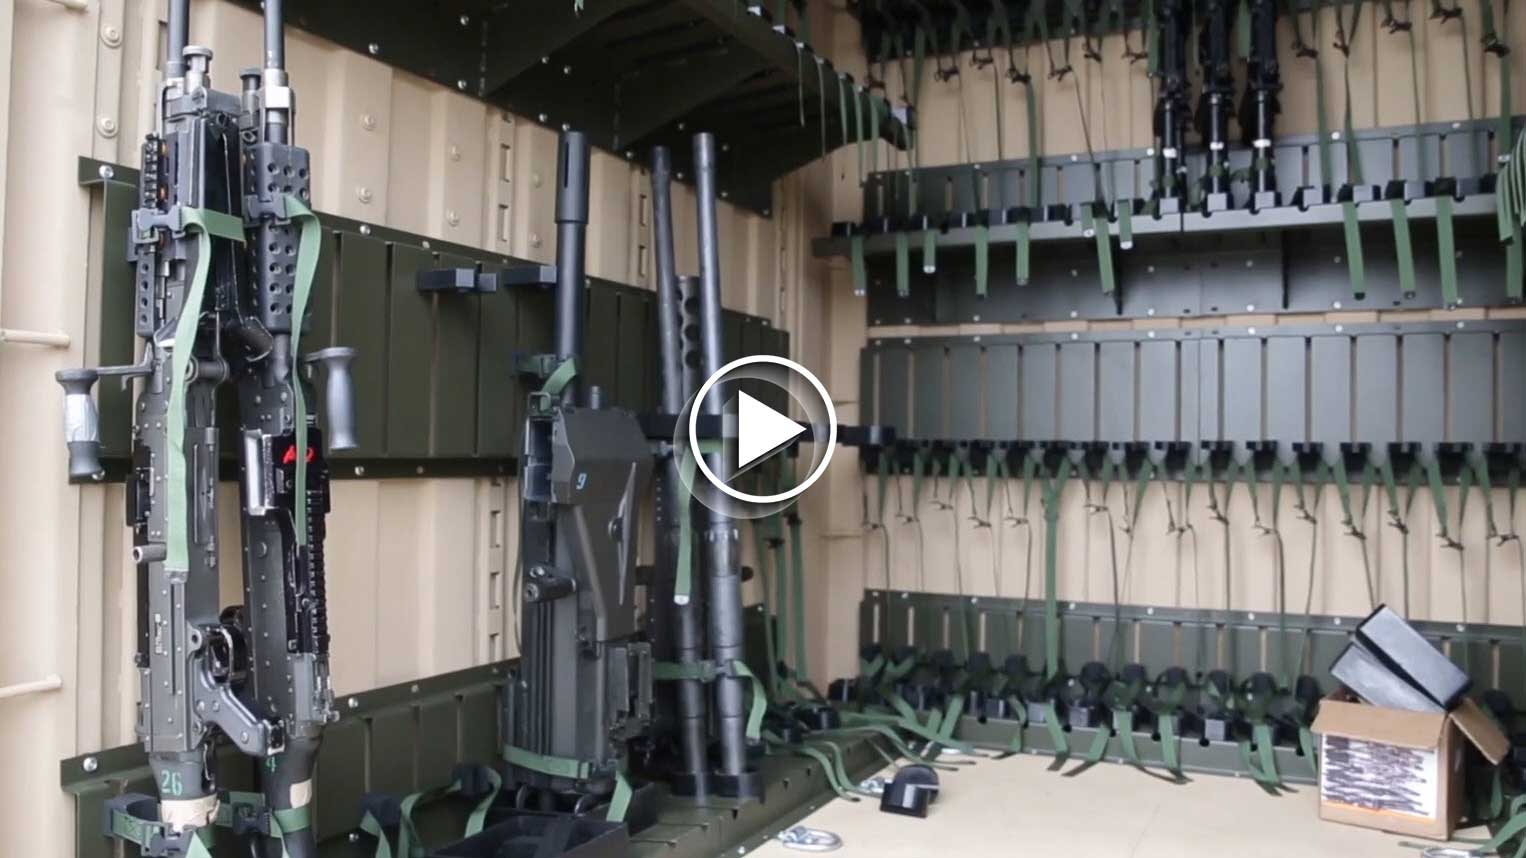 Tricon Weapons Storage System